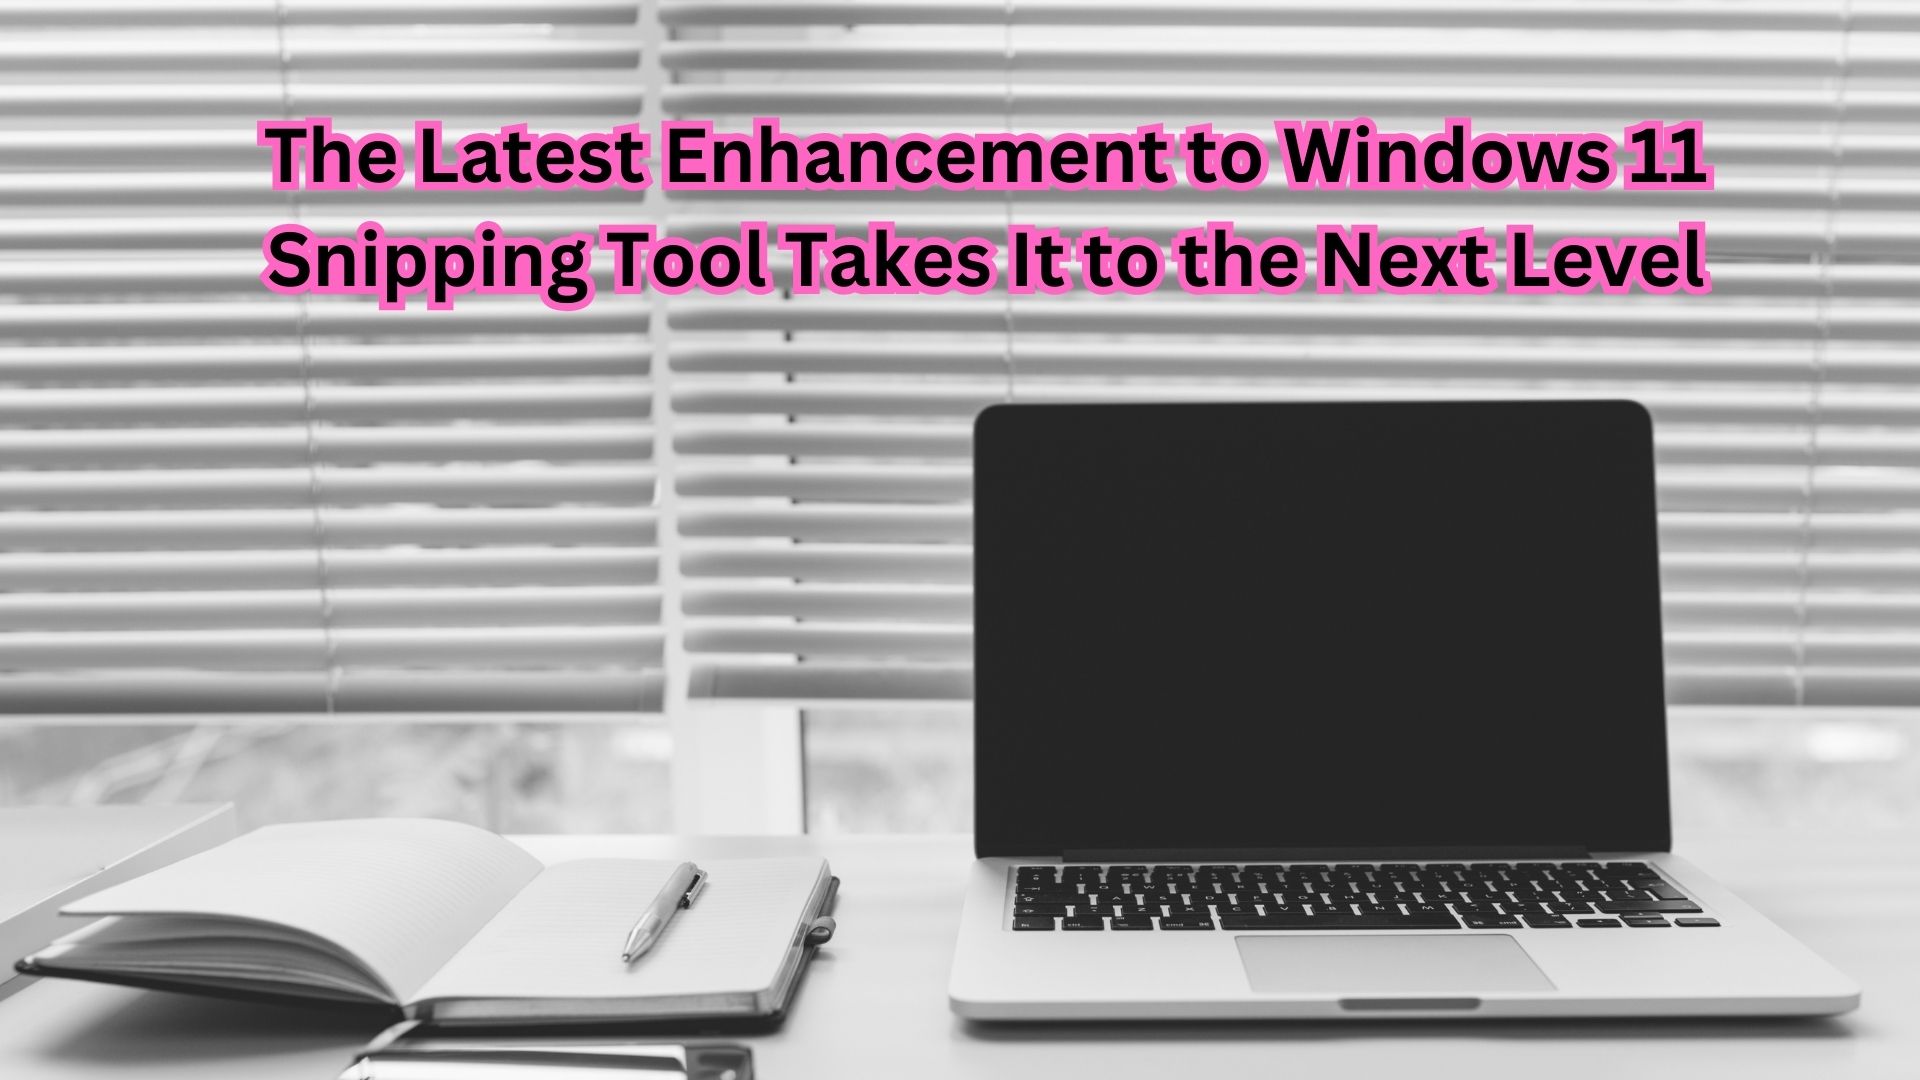 The Latest Enhancement to Windows 11 Snipping Tool Takes It to the Next Level